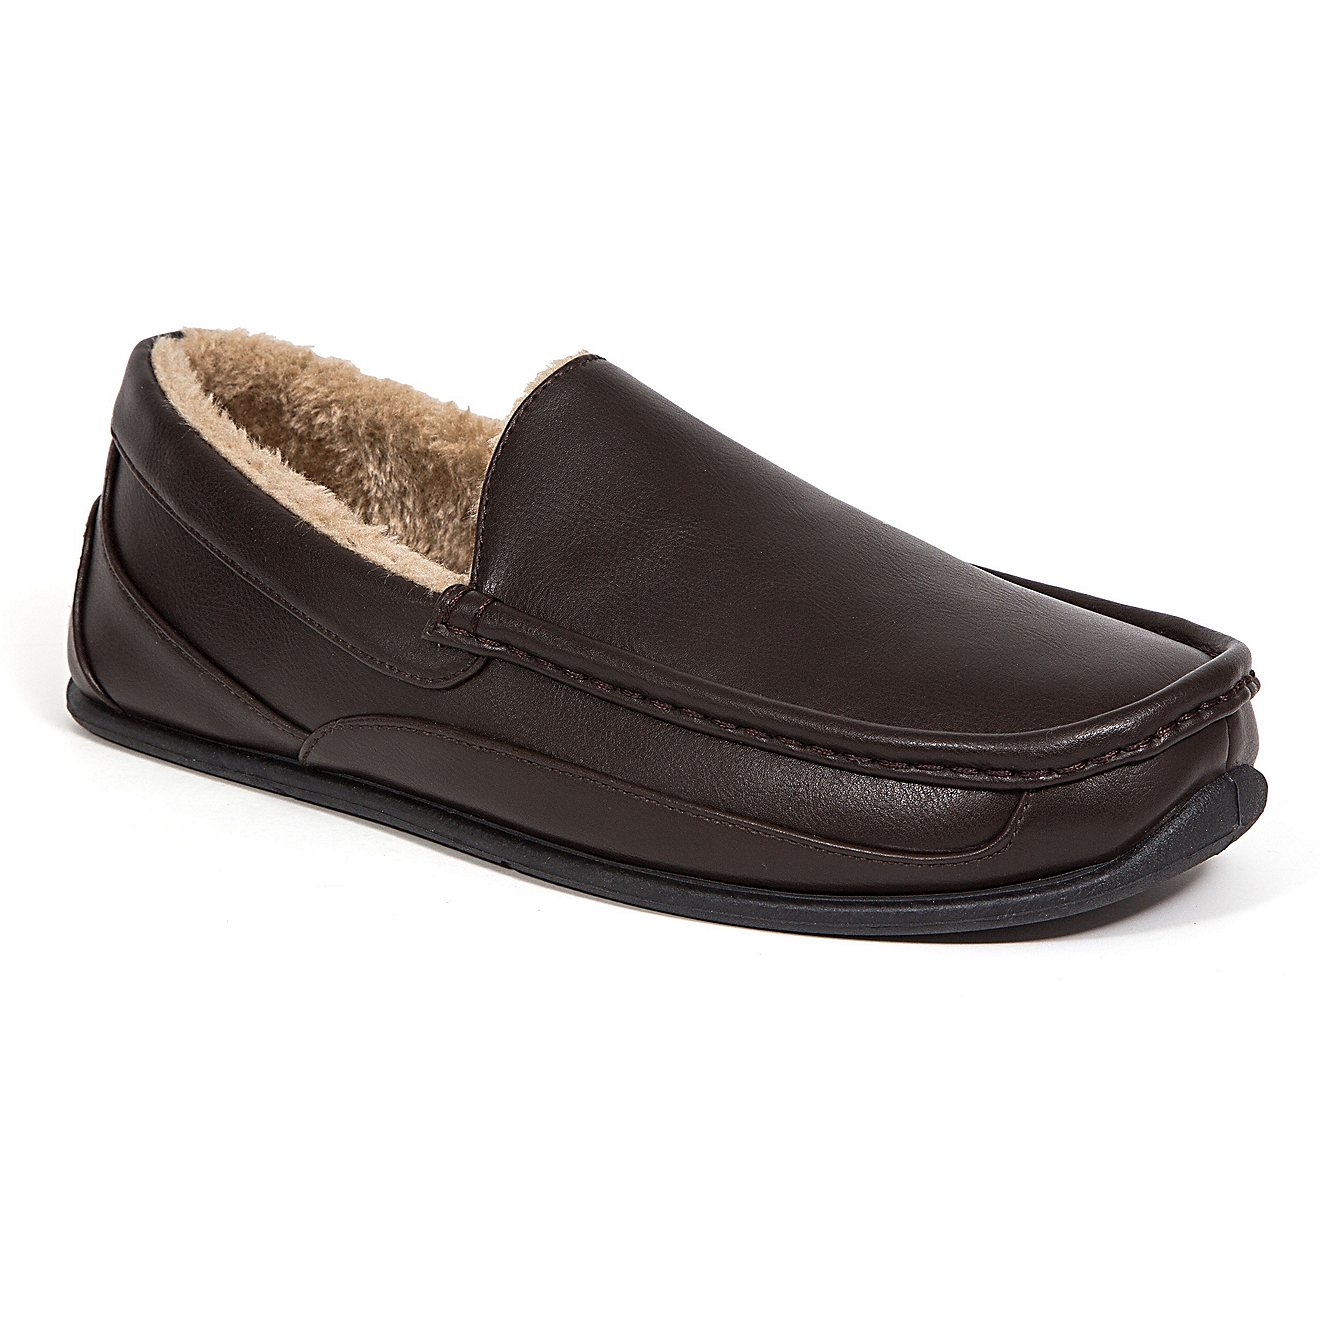 Deer Stags Men’s Slipperooz Moccasin Slippers                                                                                  - view number 2